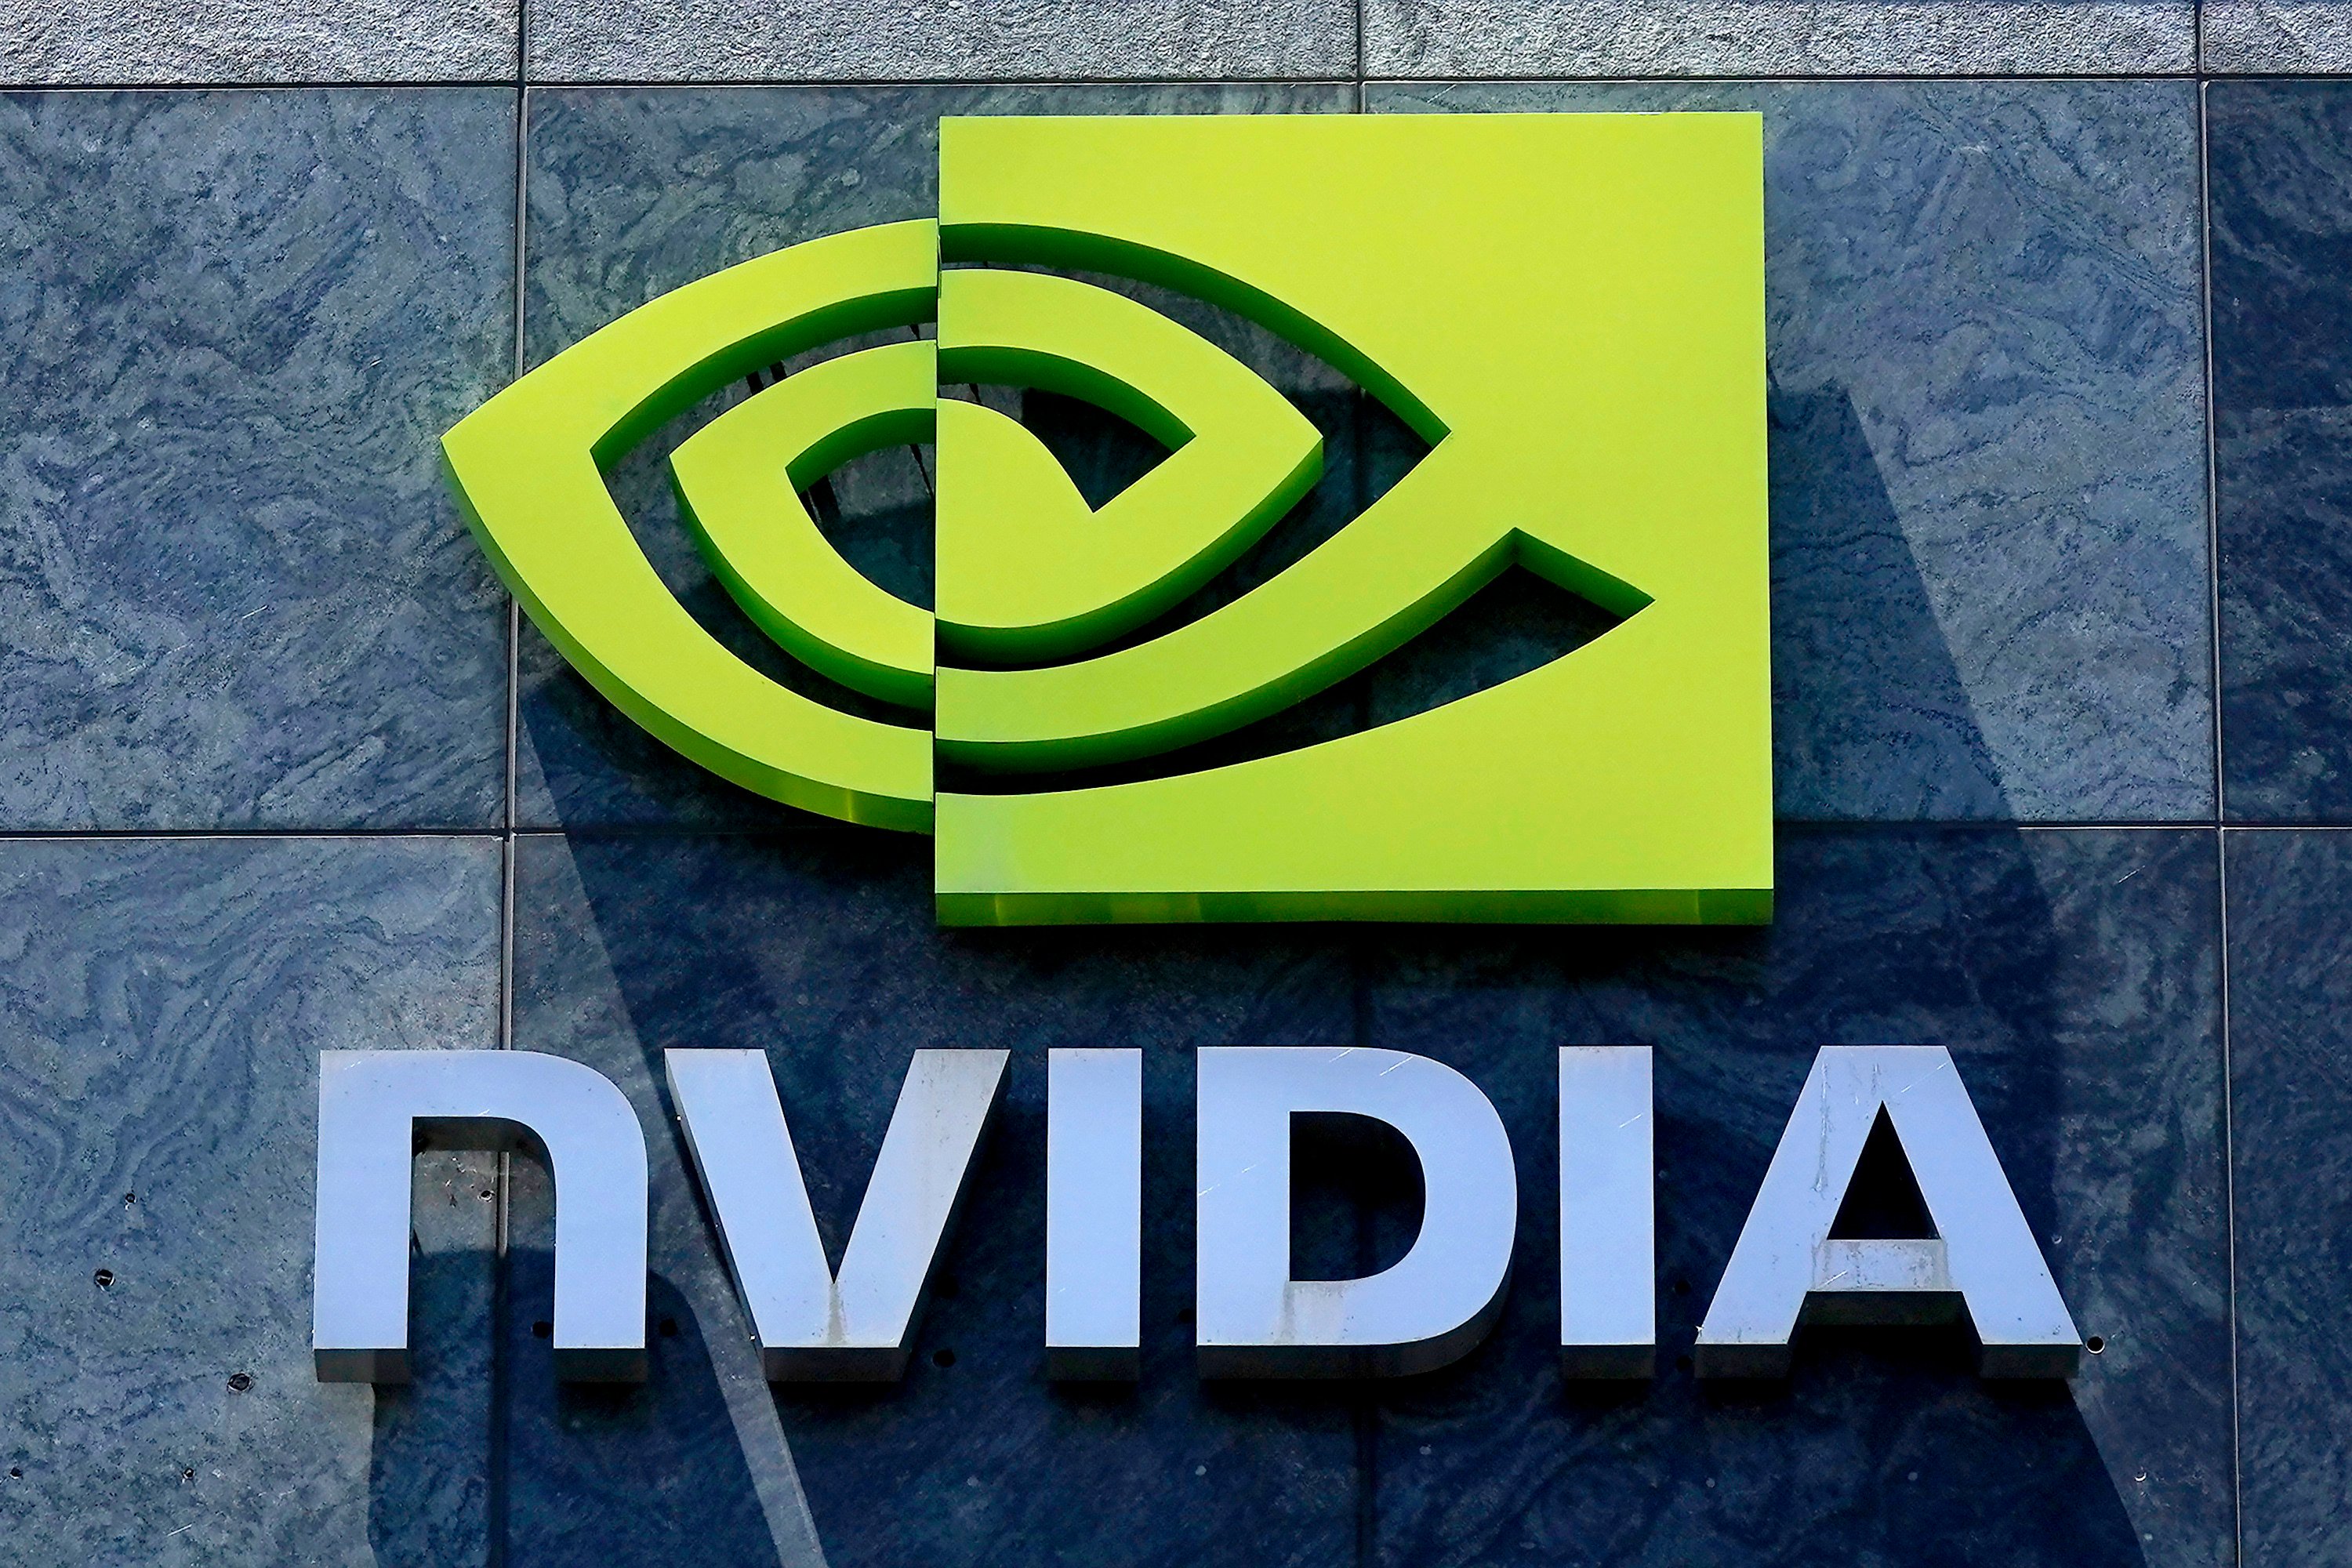 Nvidia is set to face charges from French antitrust authorities, according to sources. Photo: AP Photo